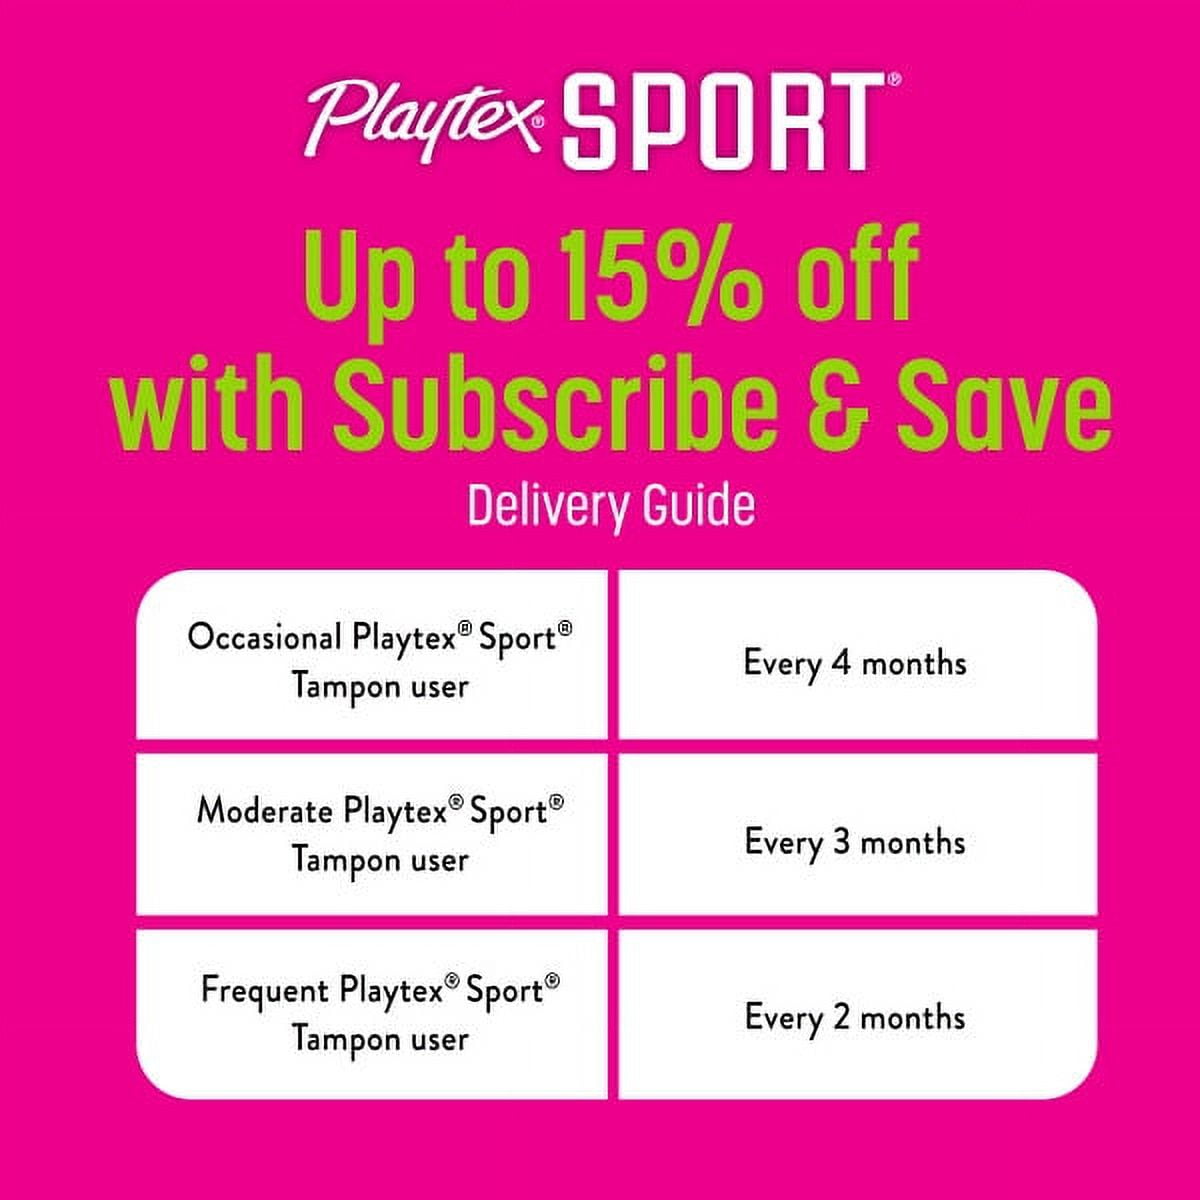 Playtex Sport Tampons Coupon To Print – Save $4 - iHeartPublix